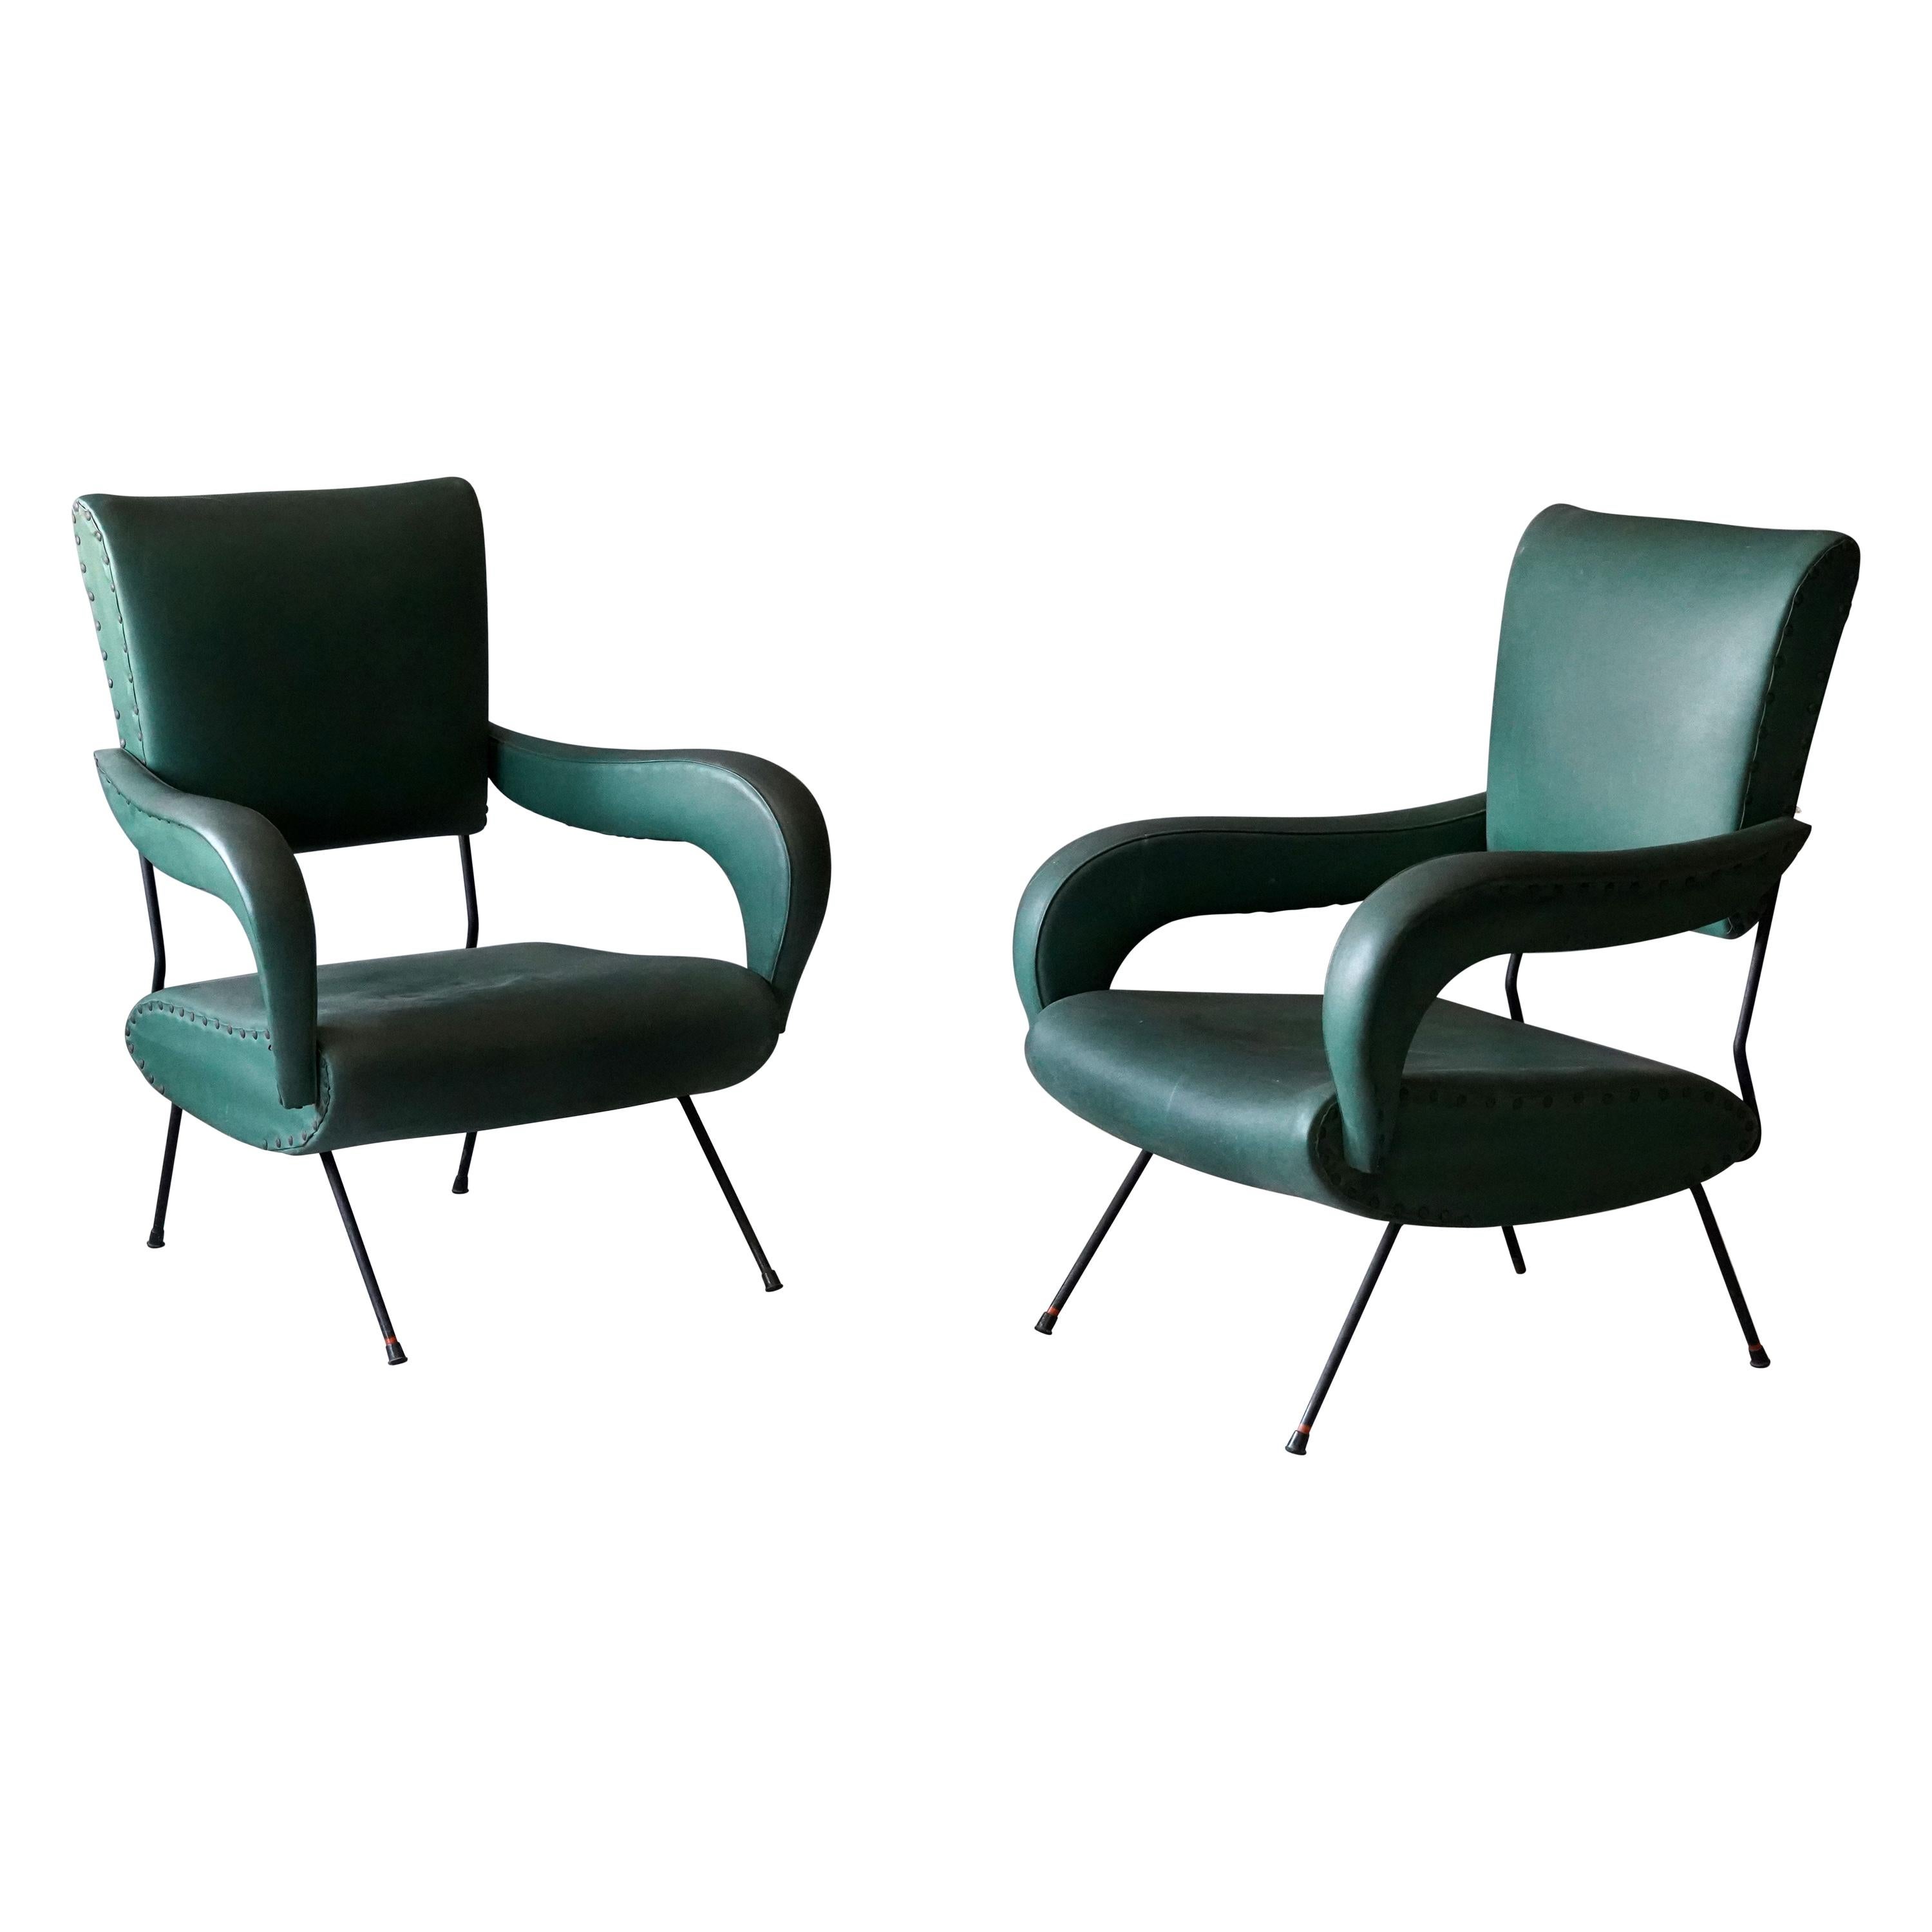 Italian Designer, Lounge Chairs, Lacquered Metal, Green-Dyed Vinyl, Italy, 1950s